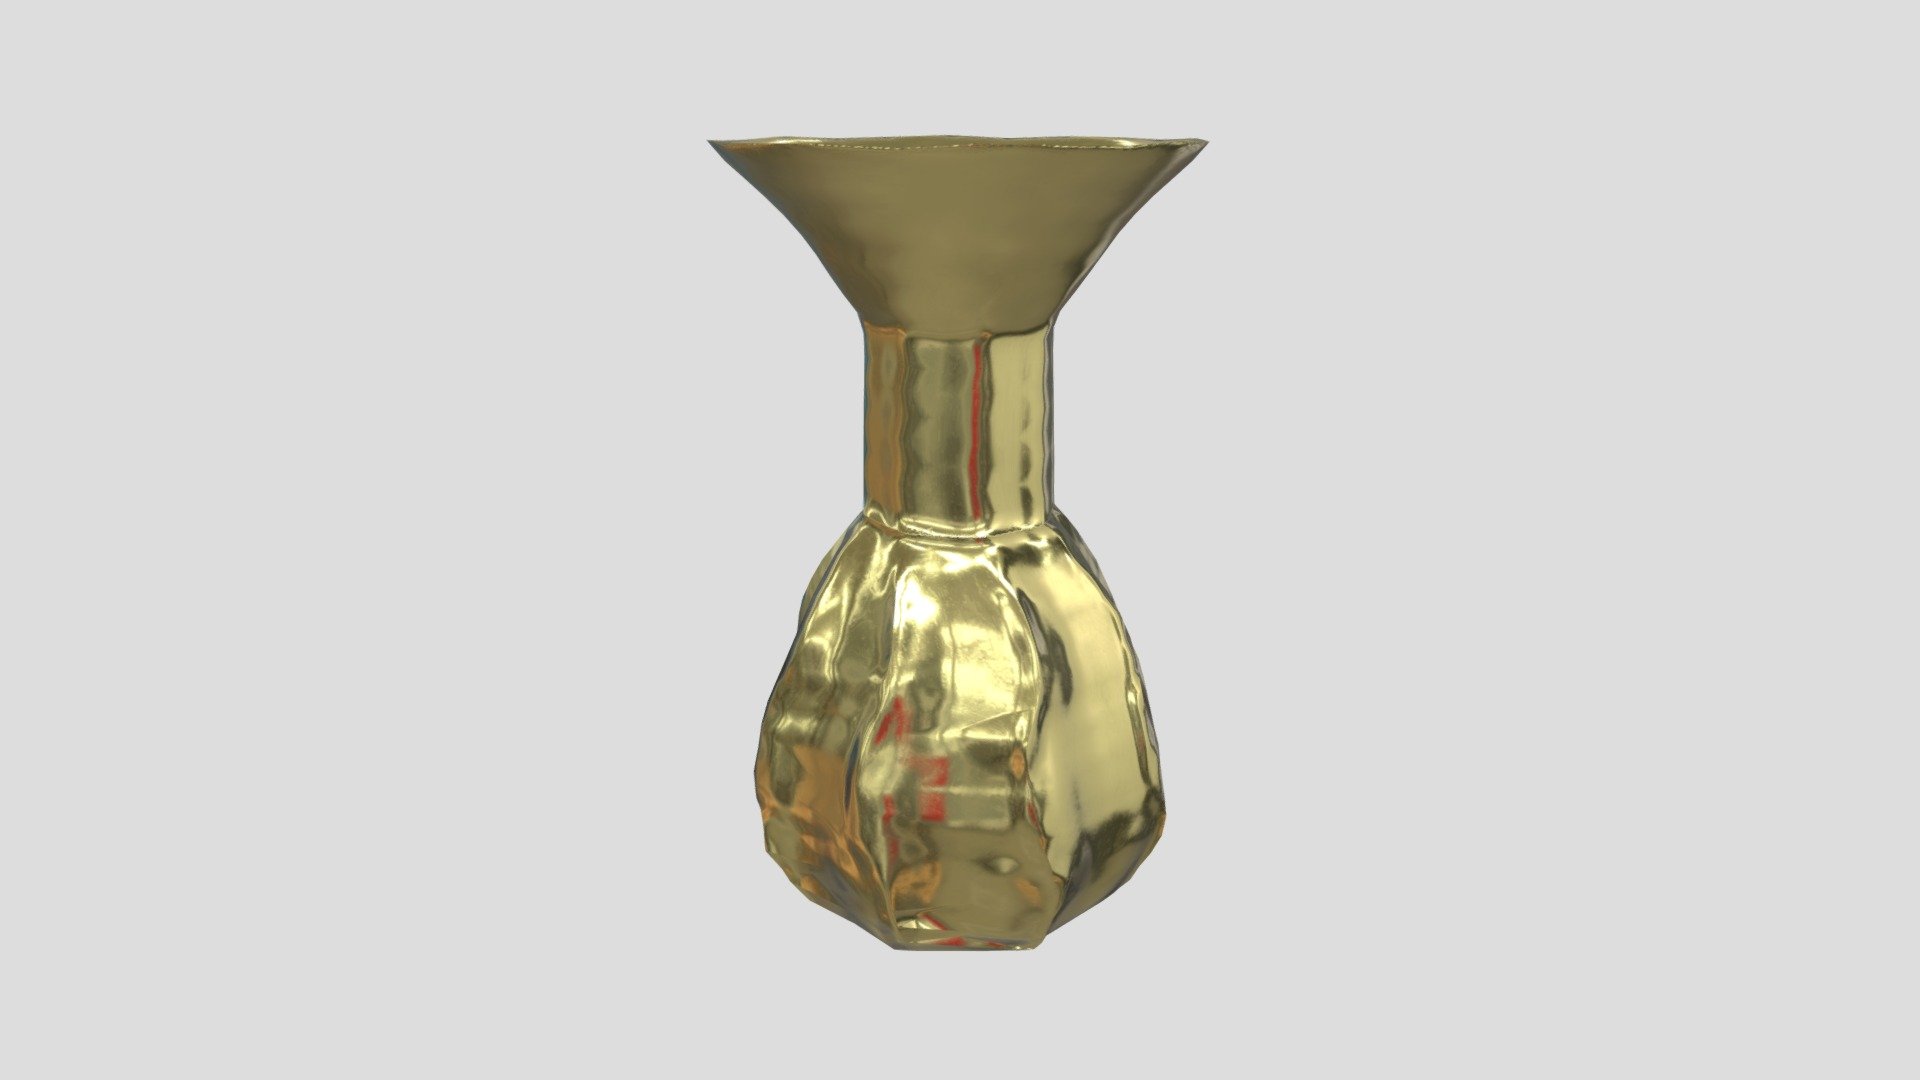 Golden vase - 3D model by Thorby76 [f5ade6a] - Sketchfab